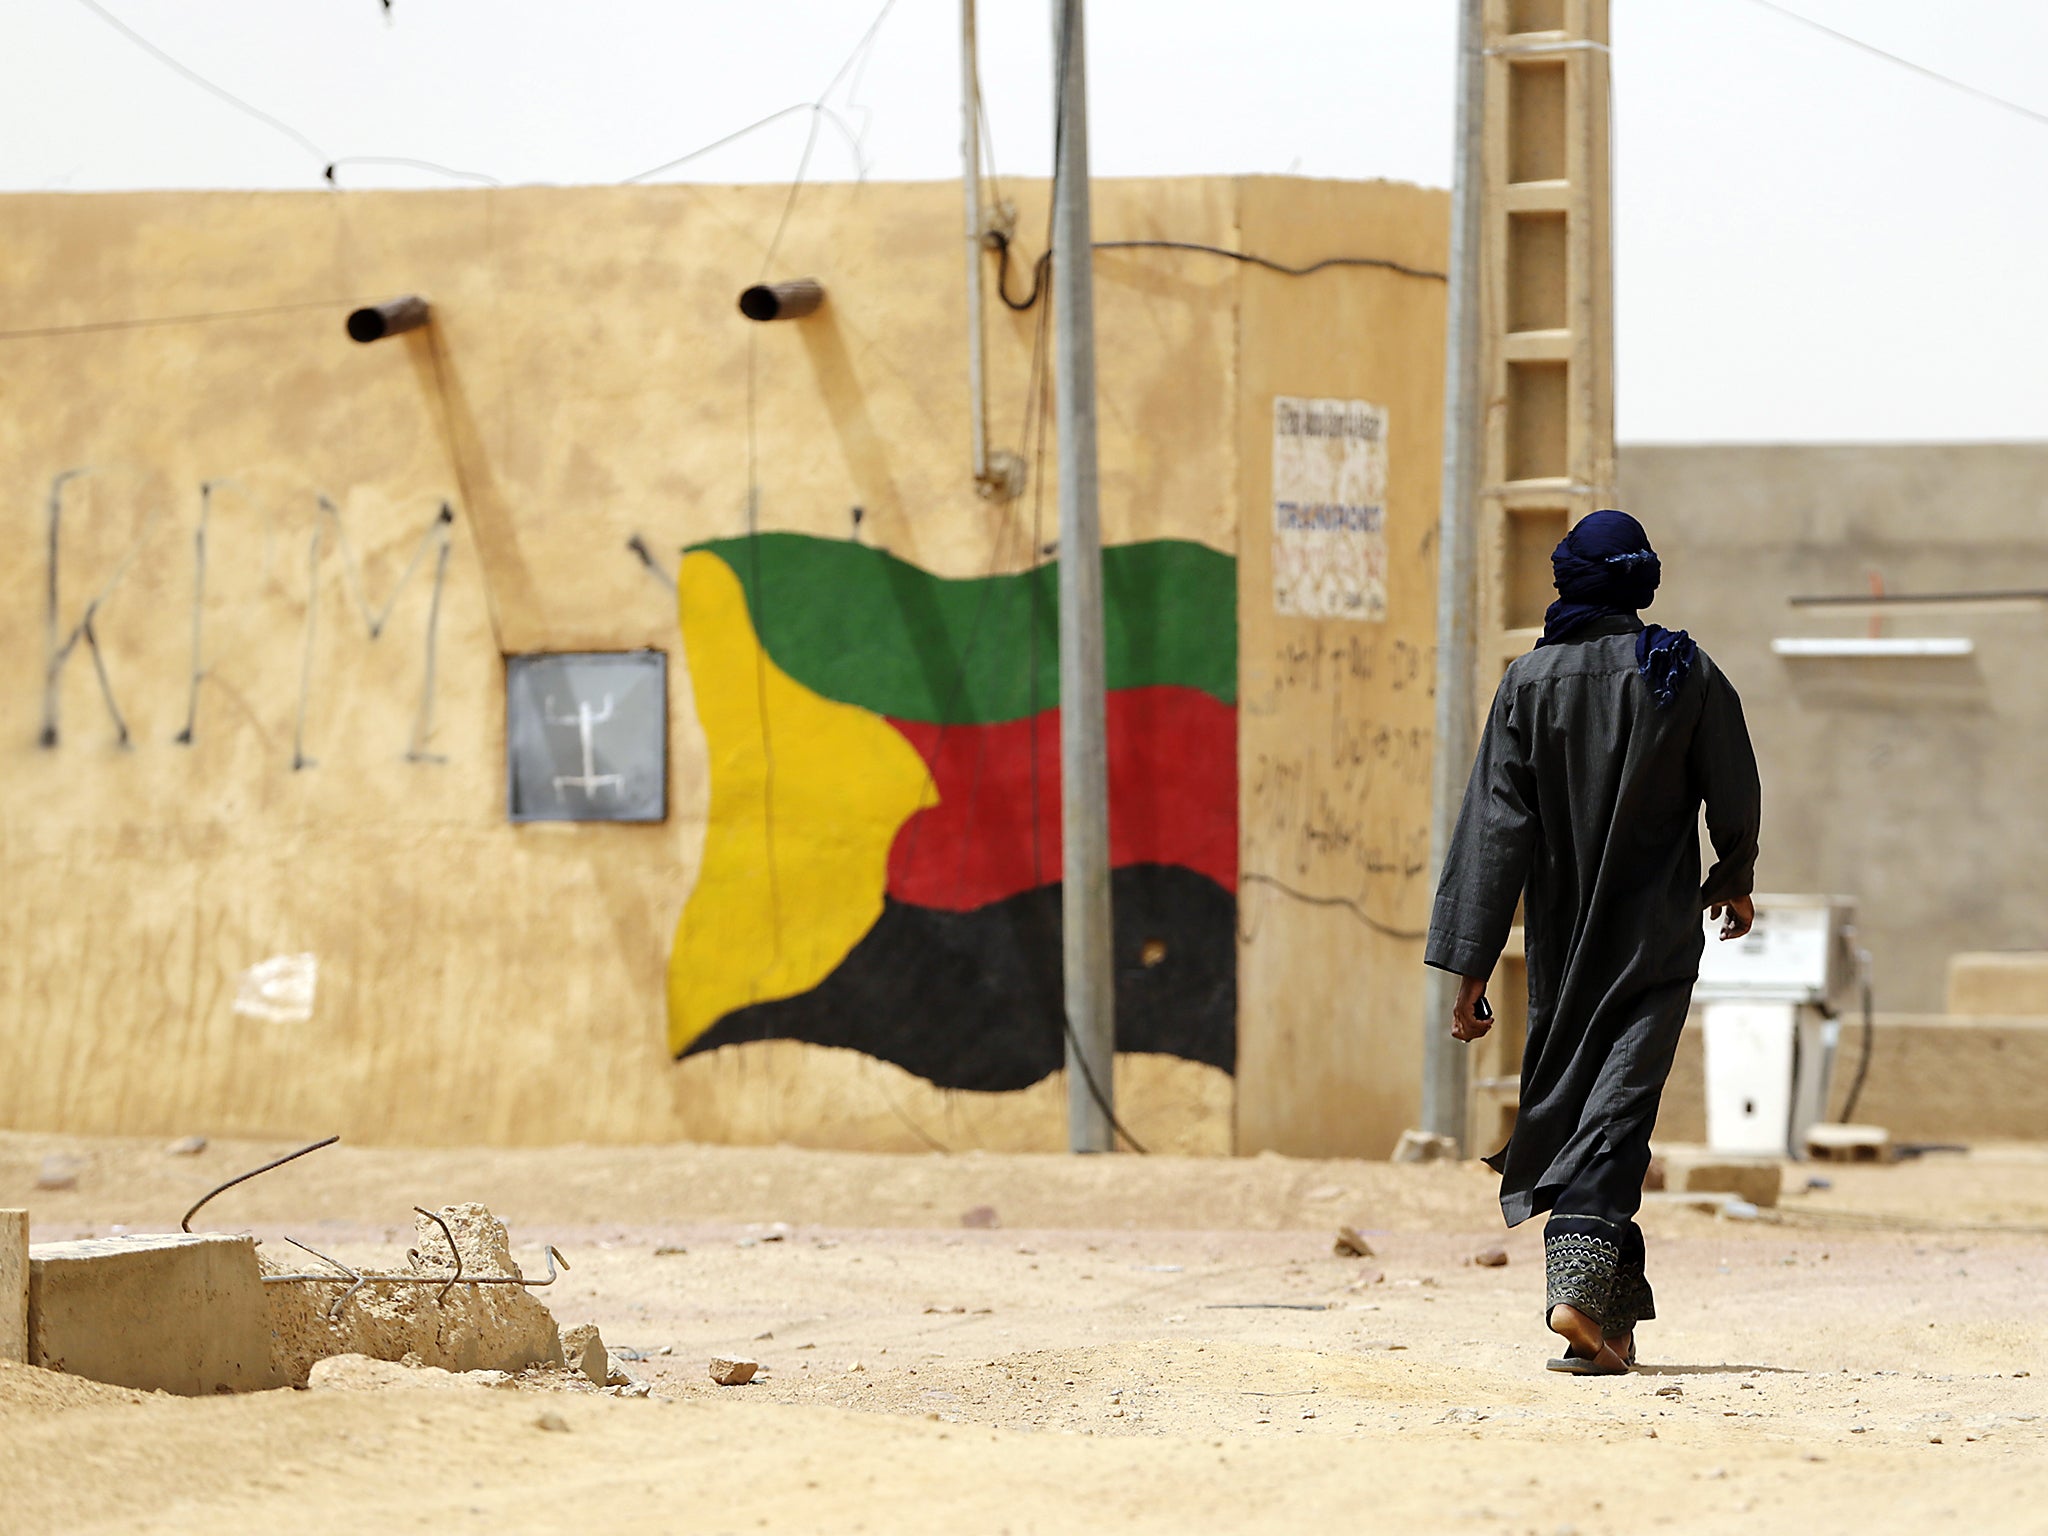 Mamadou was kidnapped in the northern Malian region of Azawad